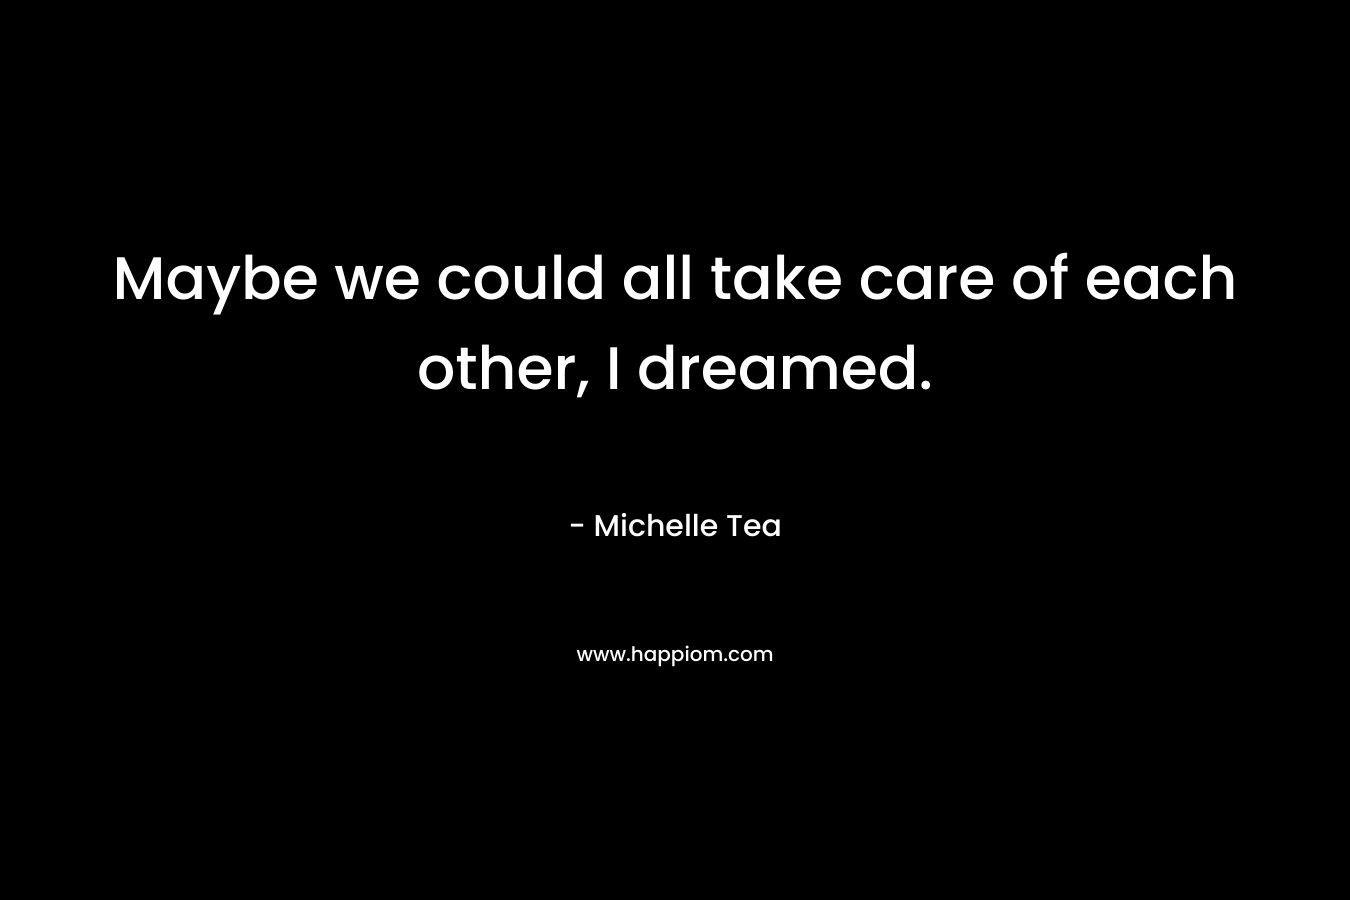 Maybe we could all take care of each other, I dreamed.